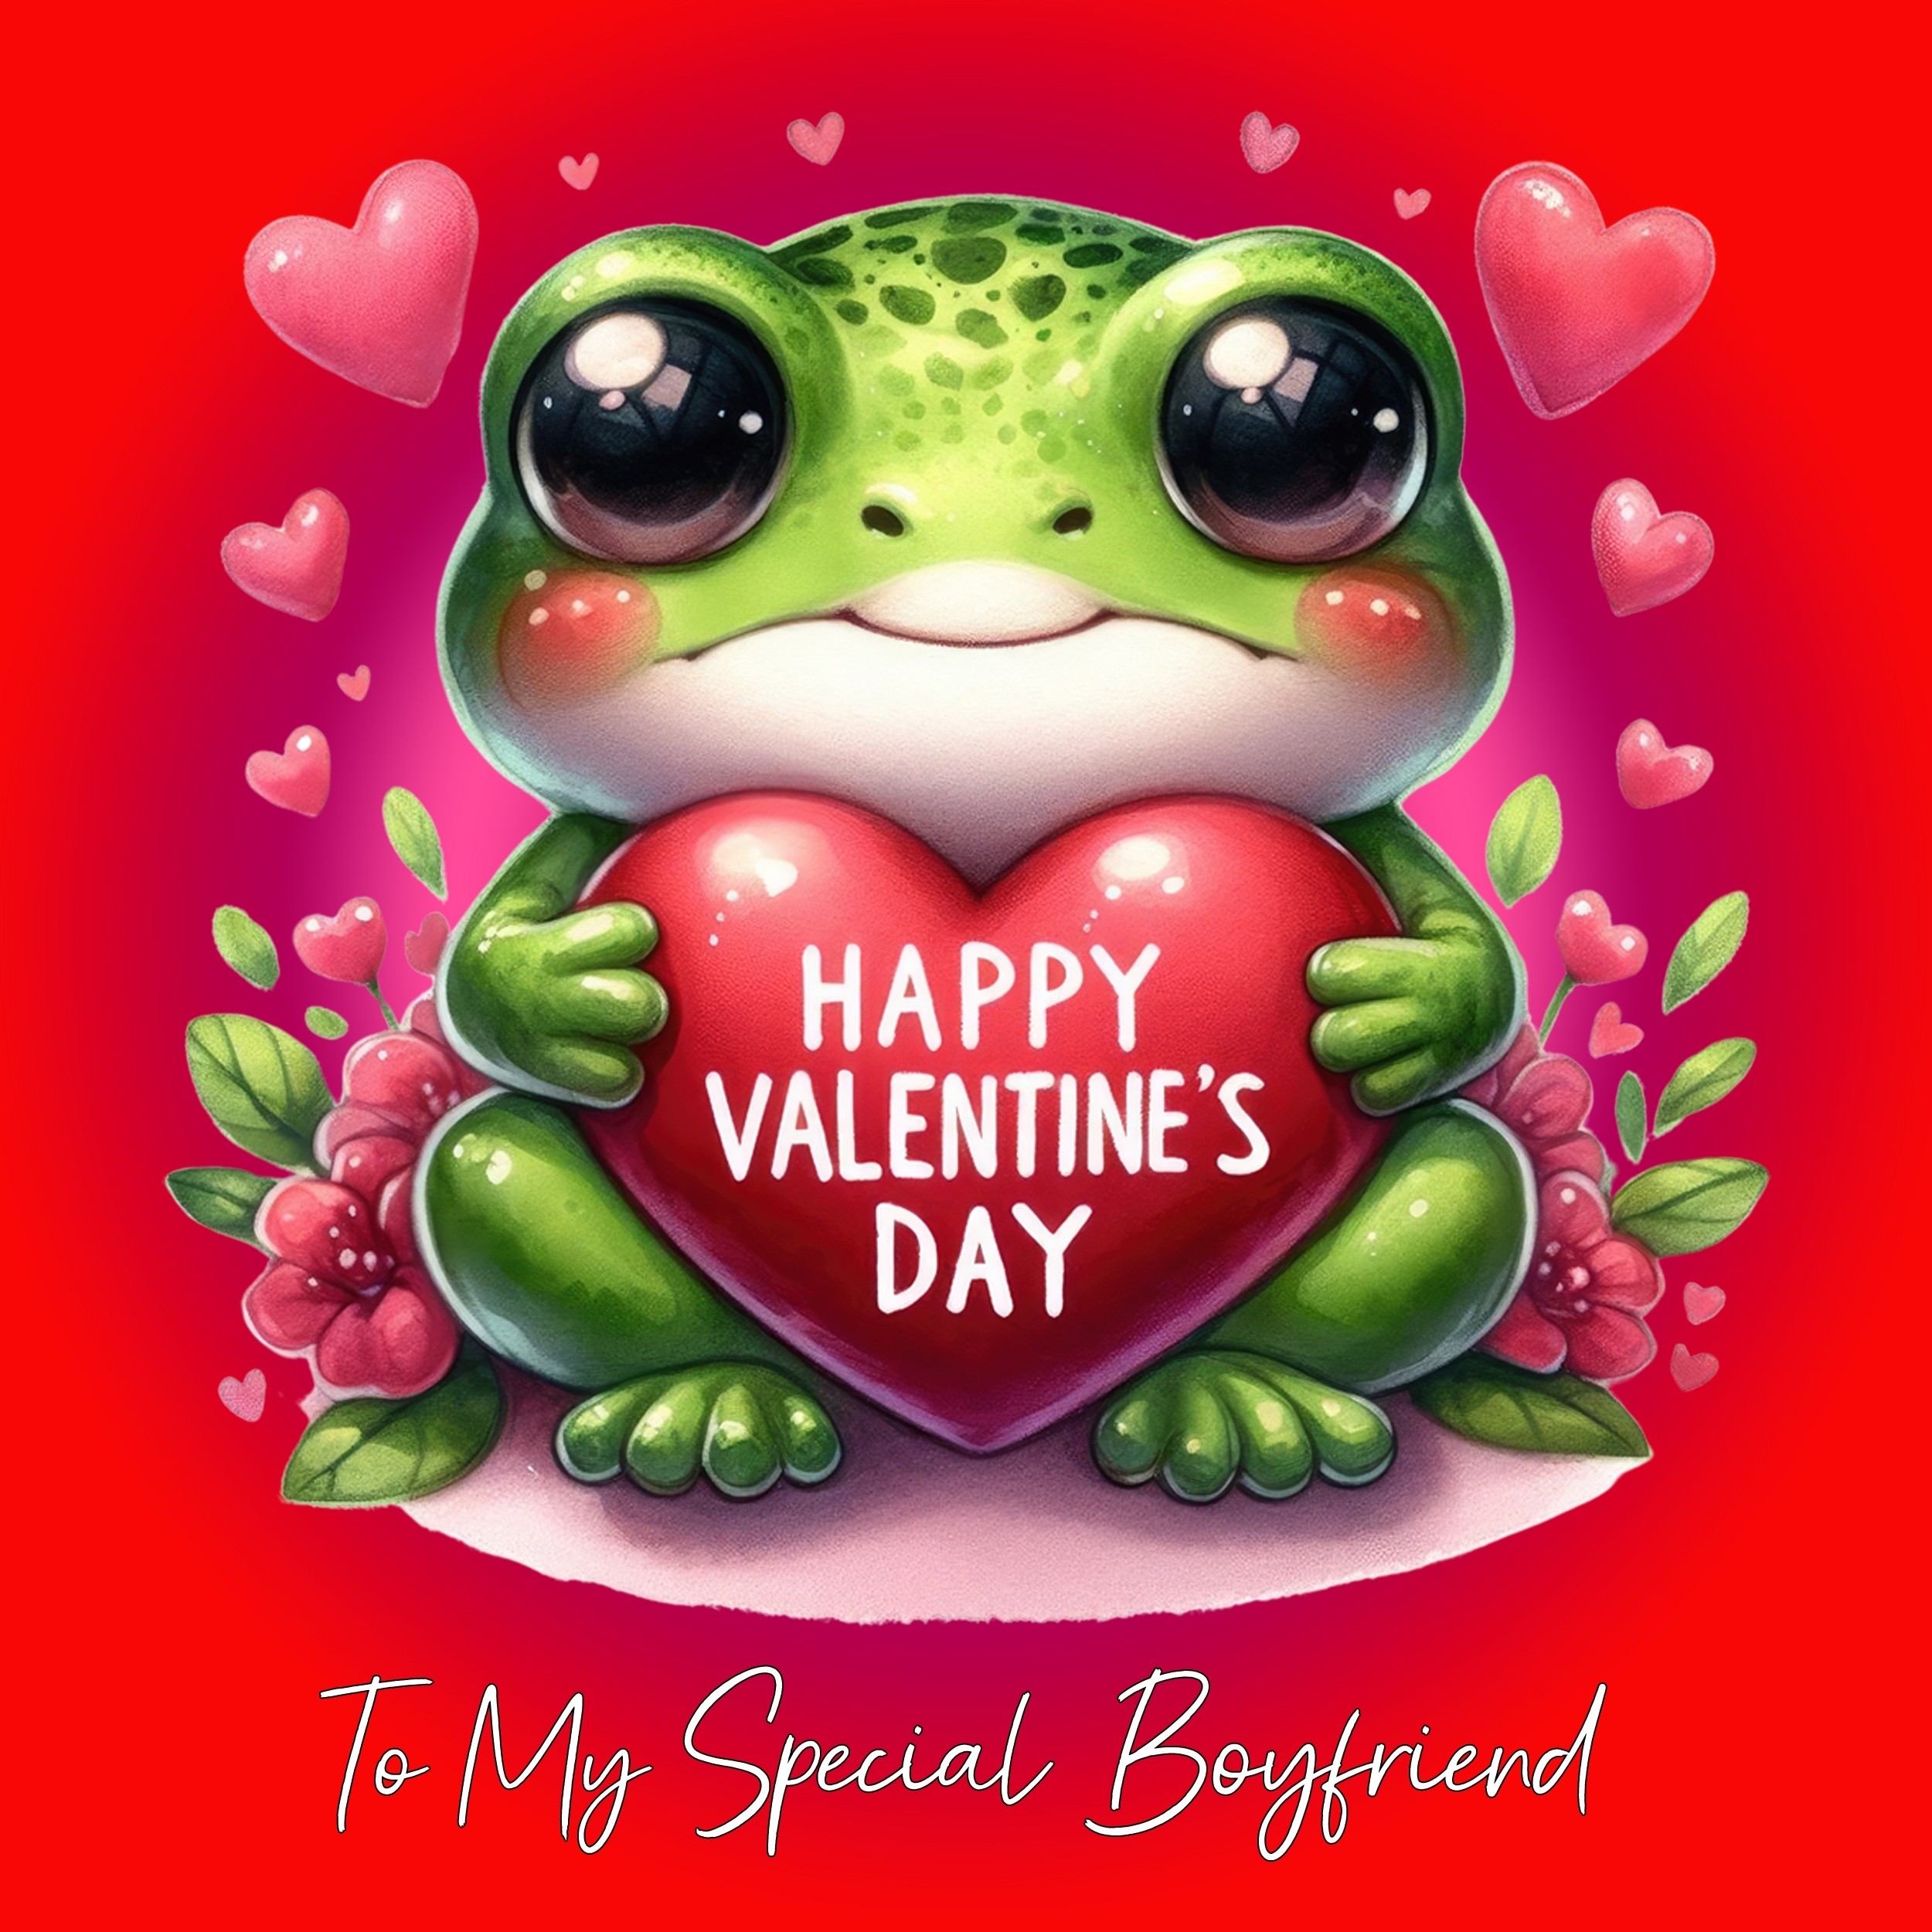 Valentines Day Square Card for Boyfriend (Frog)